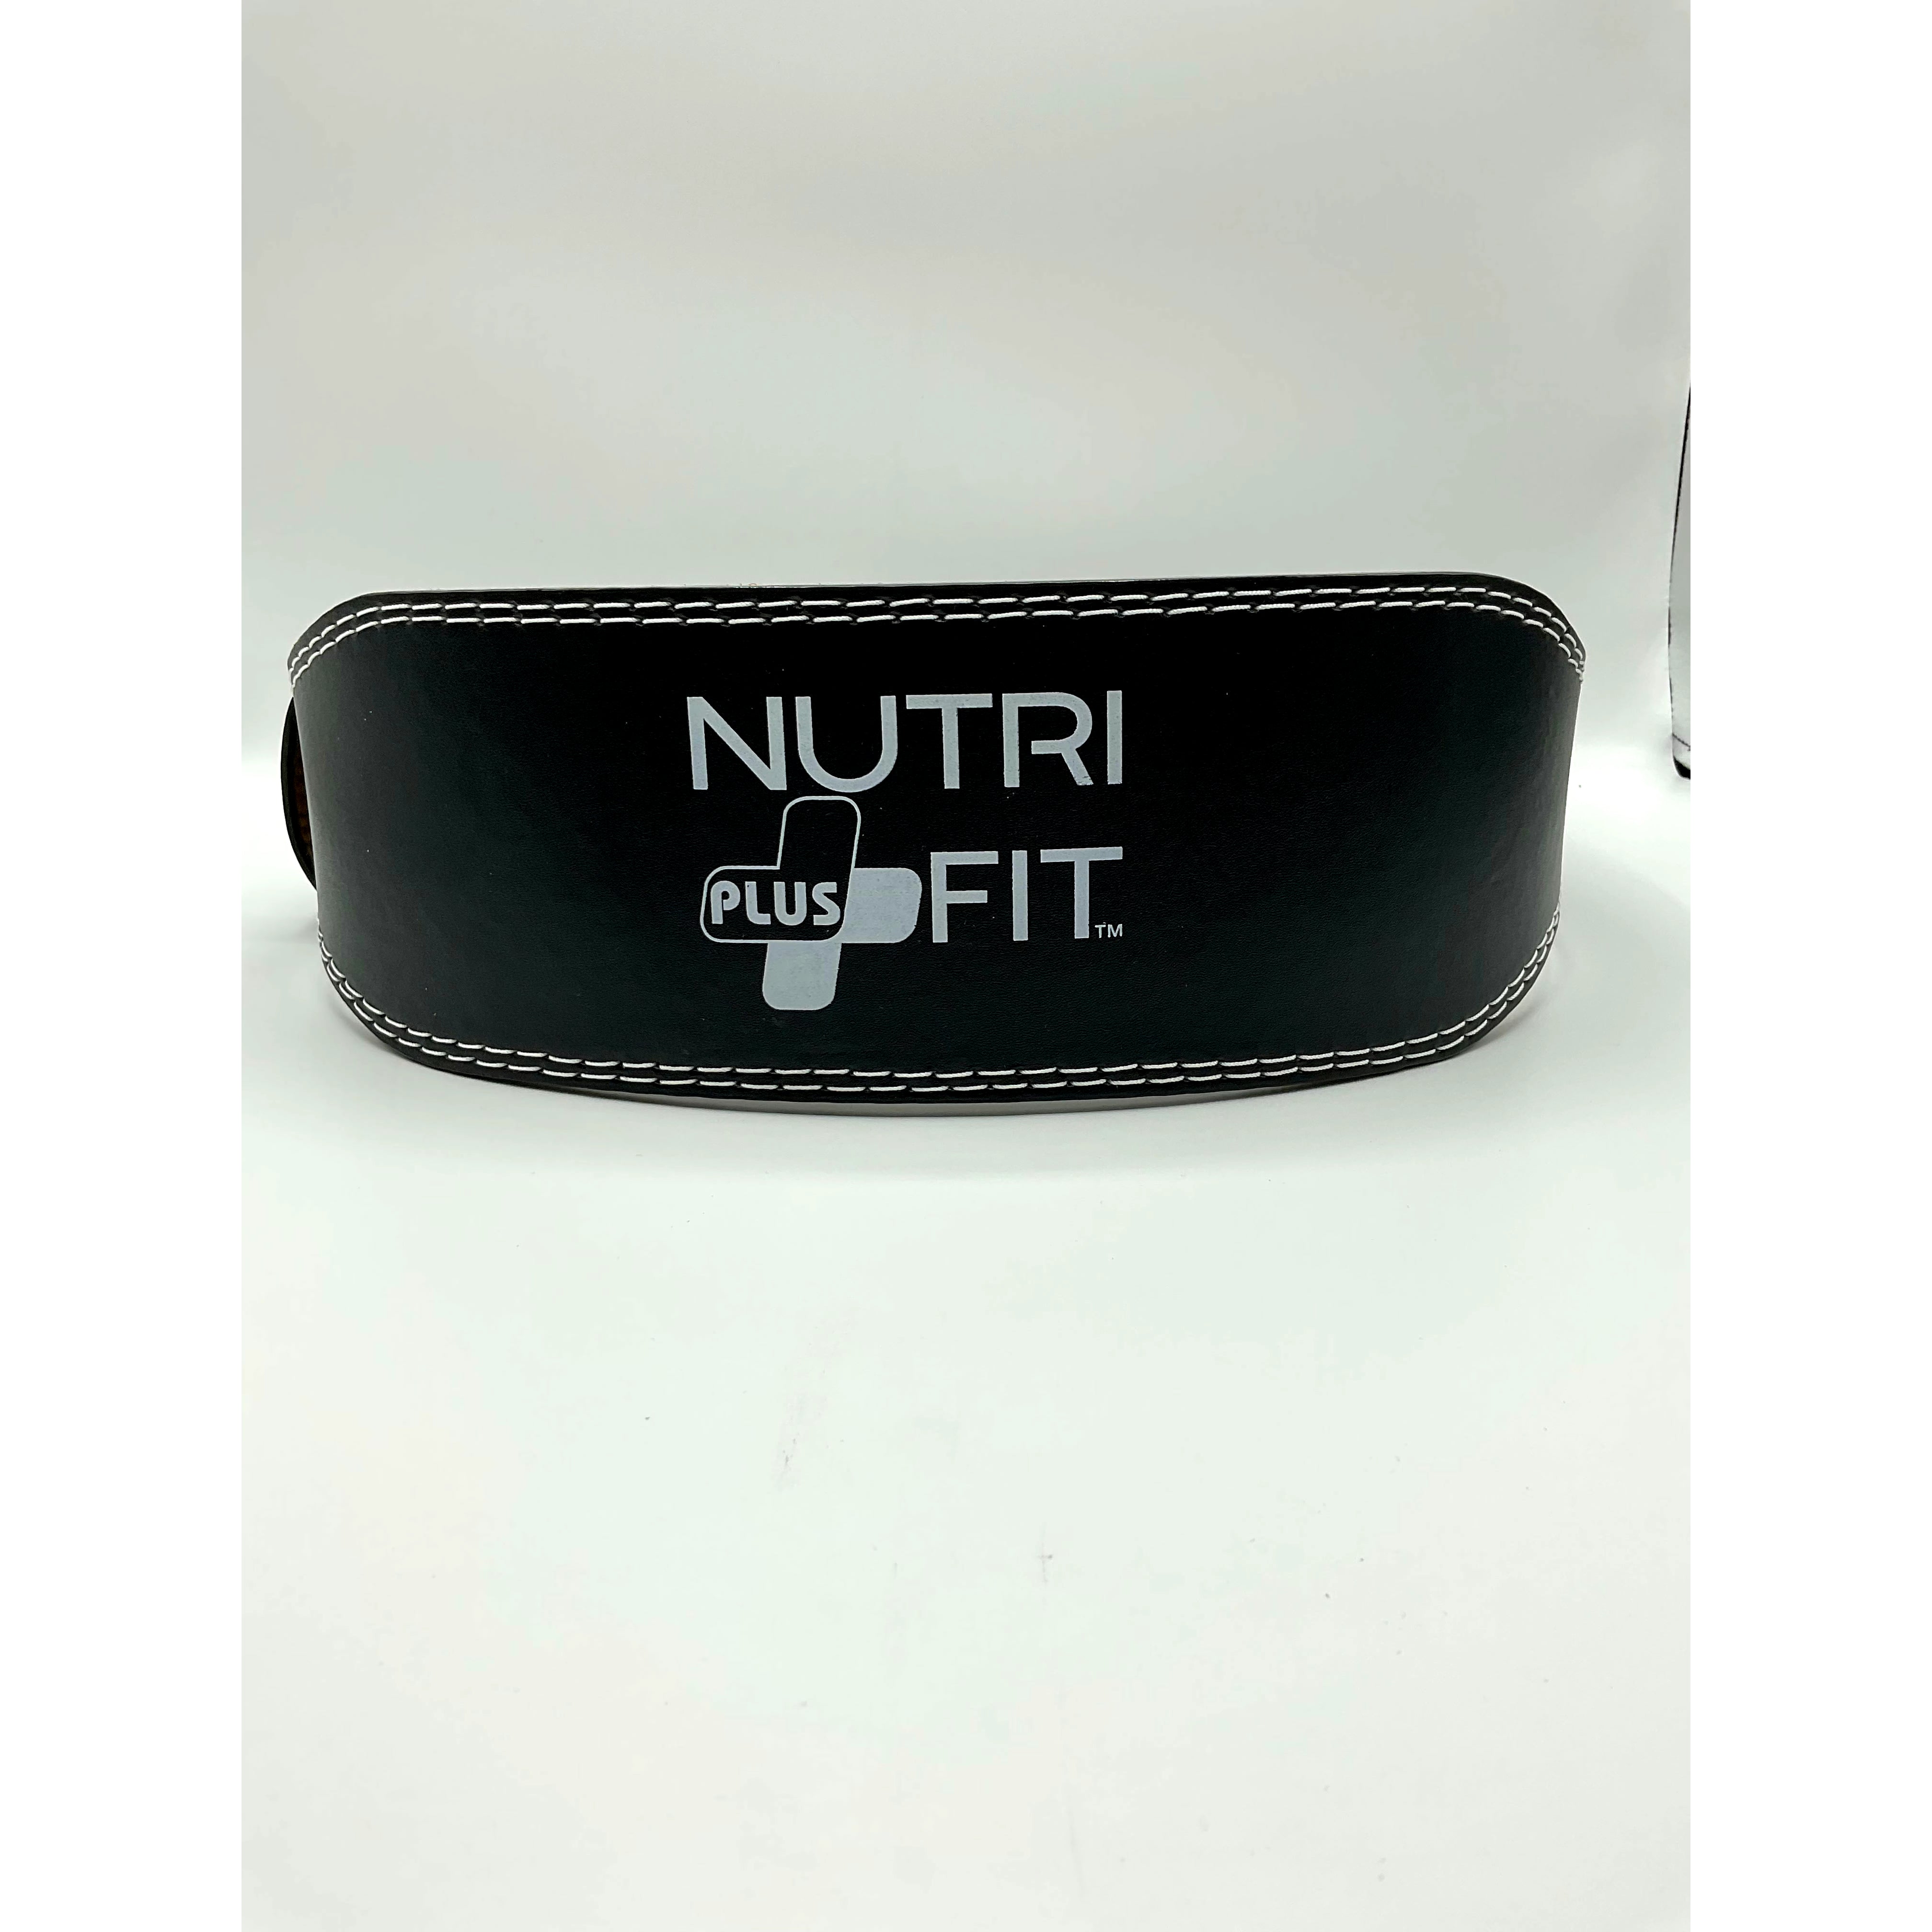 Nutri Fit Plus Premium Leather Weightlifting Belt for Fitness, Weightlifting - Support for Men and Women - Deadlift Professional Training Belt